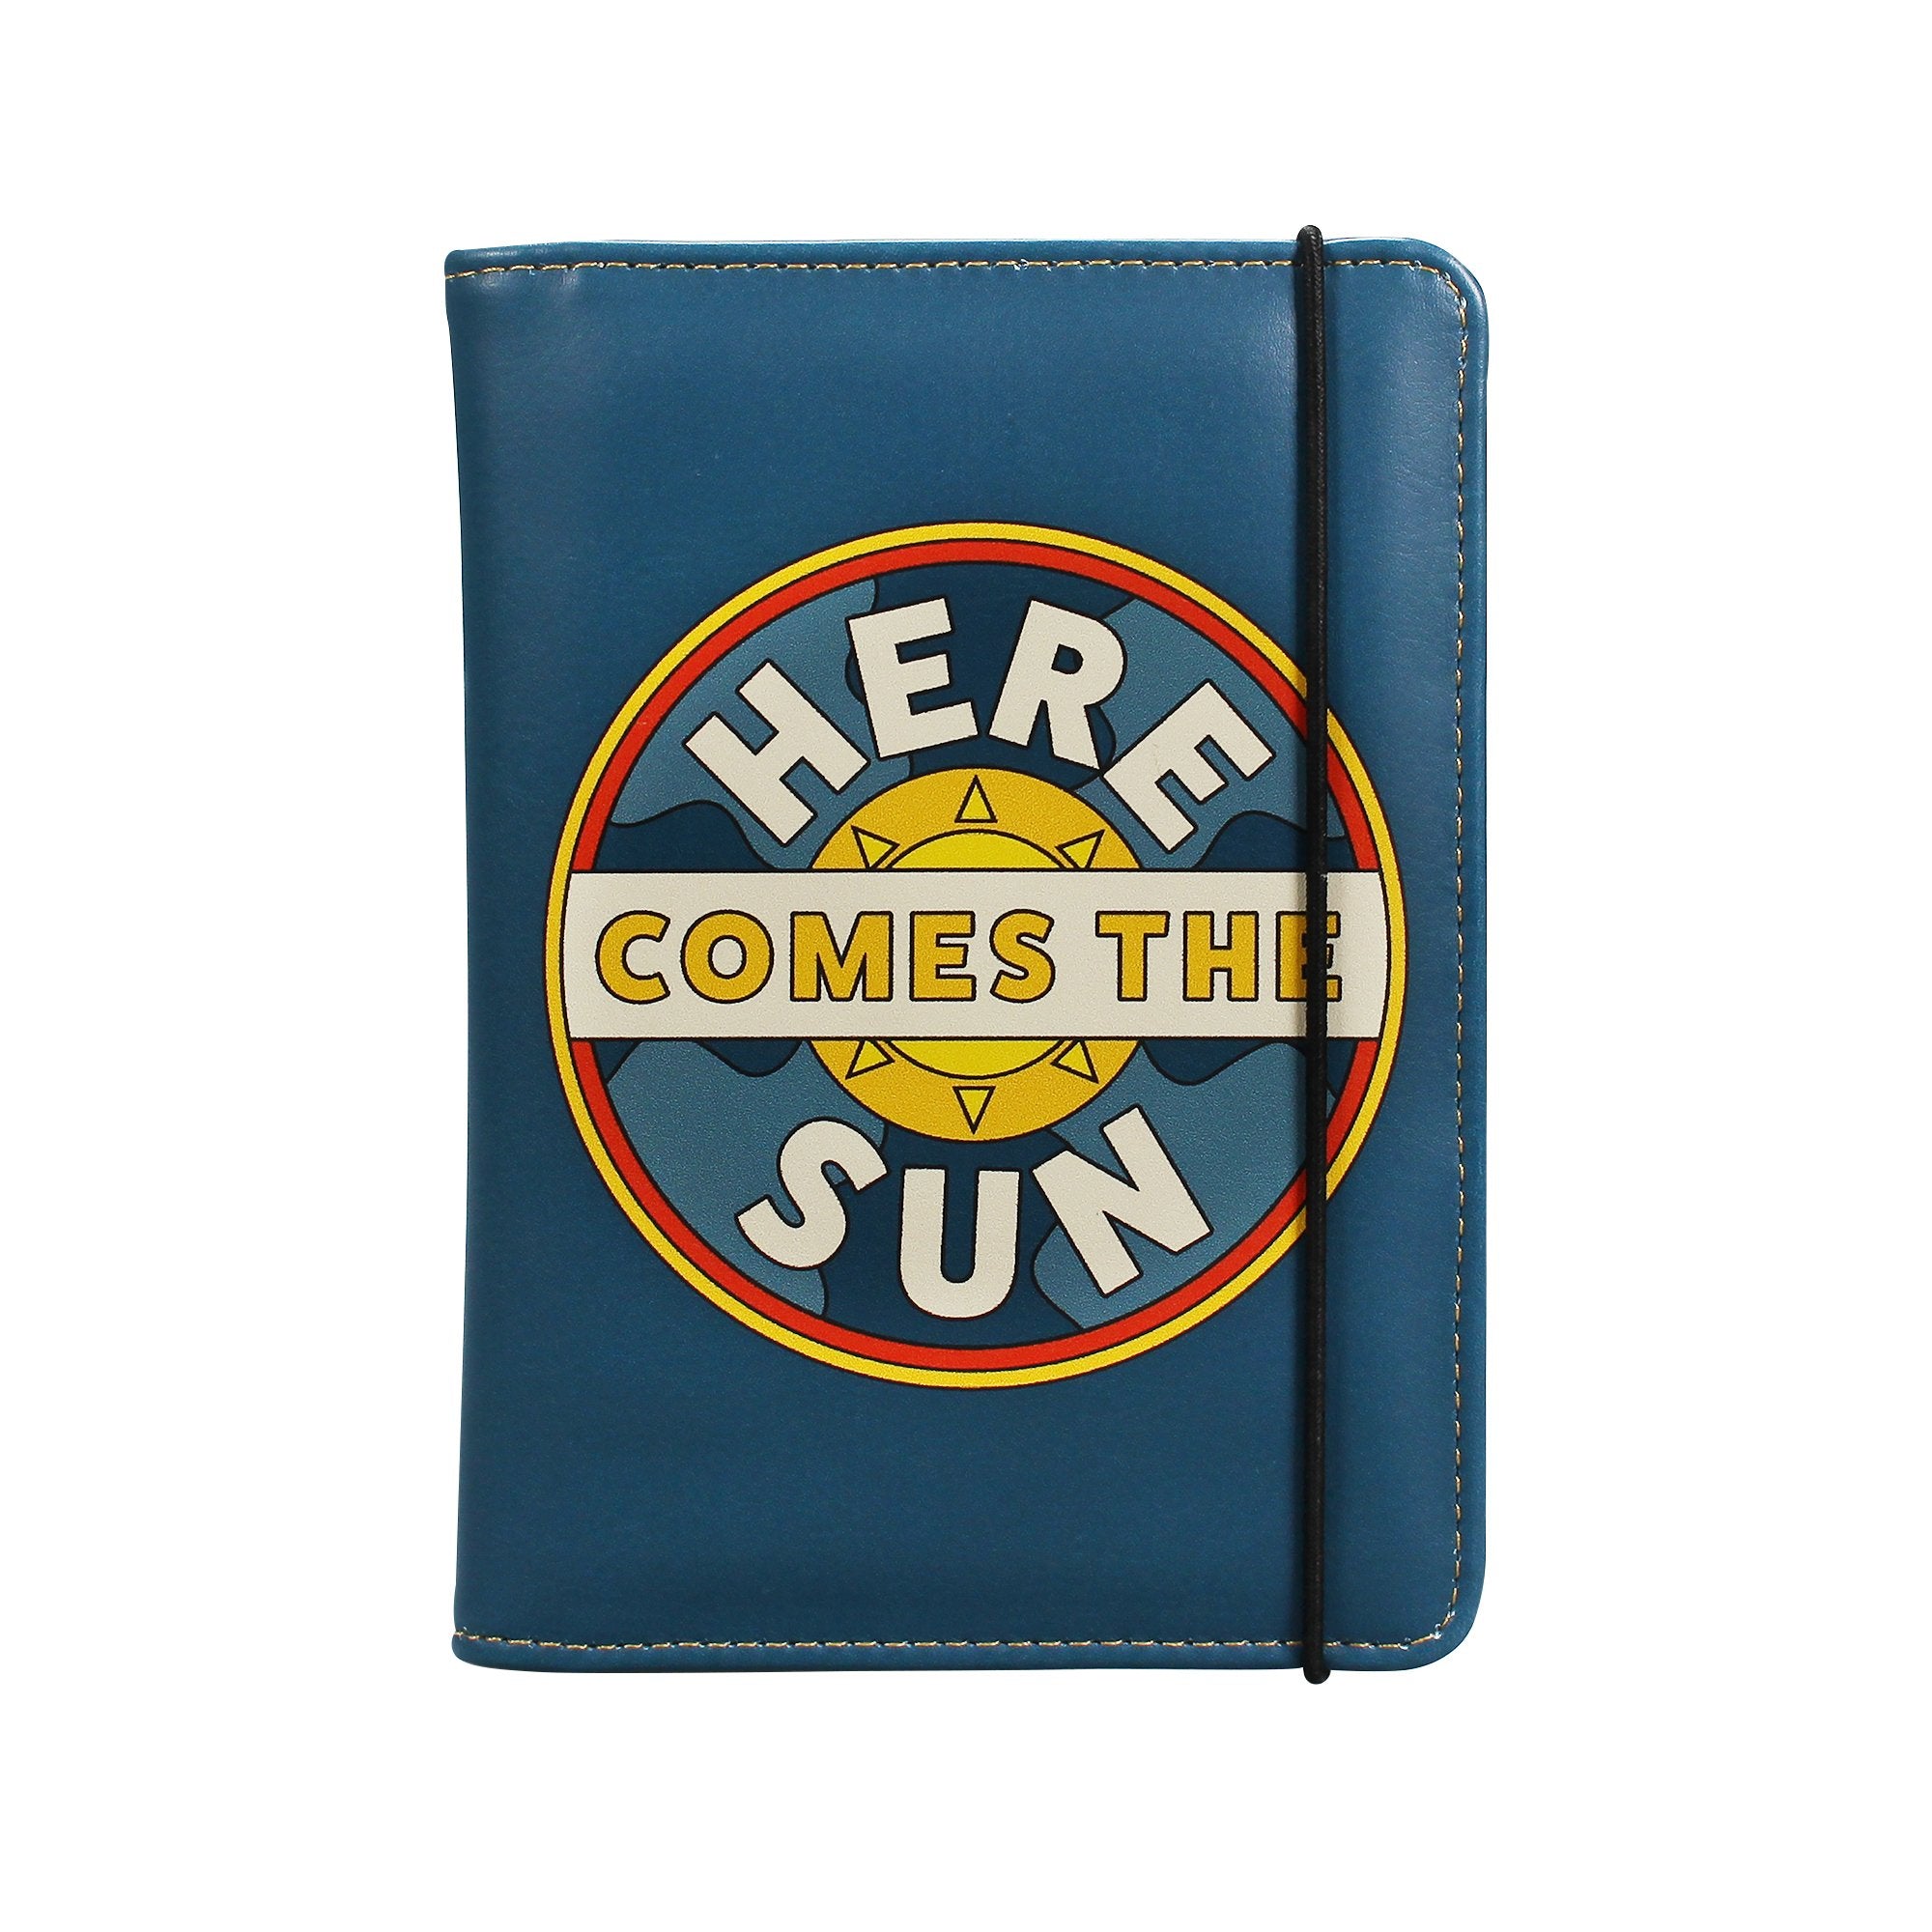 Passport Wallet - The Beatles (Here Comes the Sun)